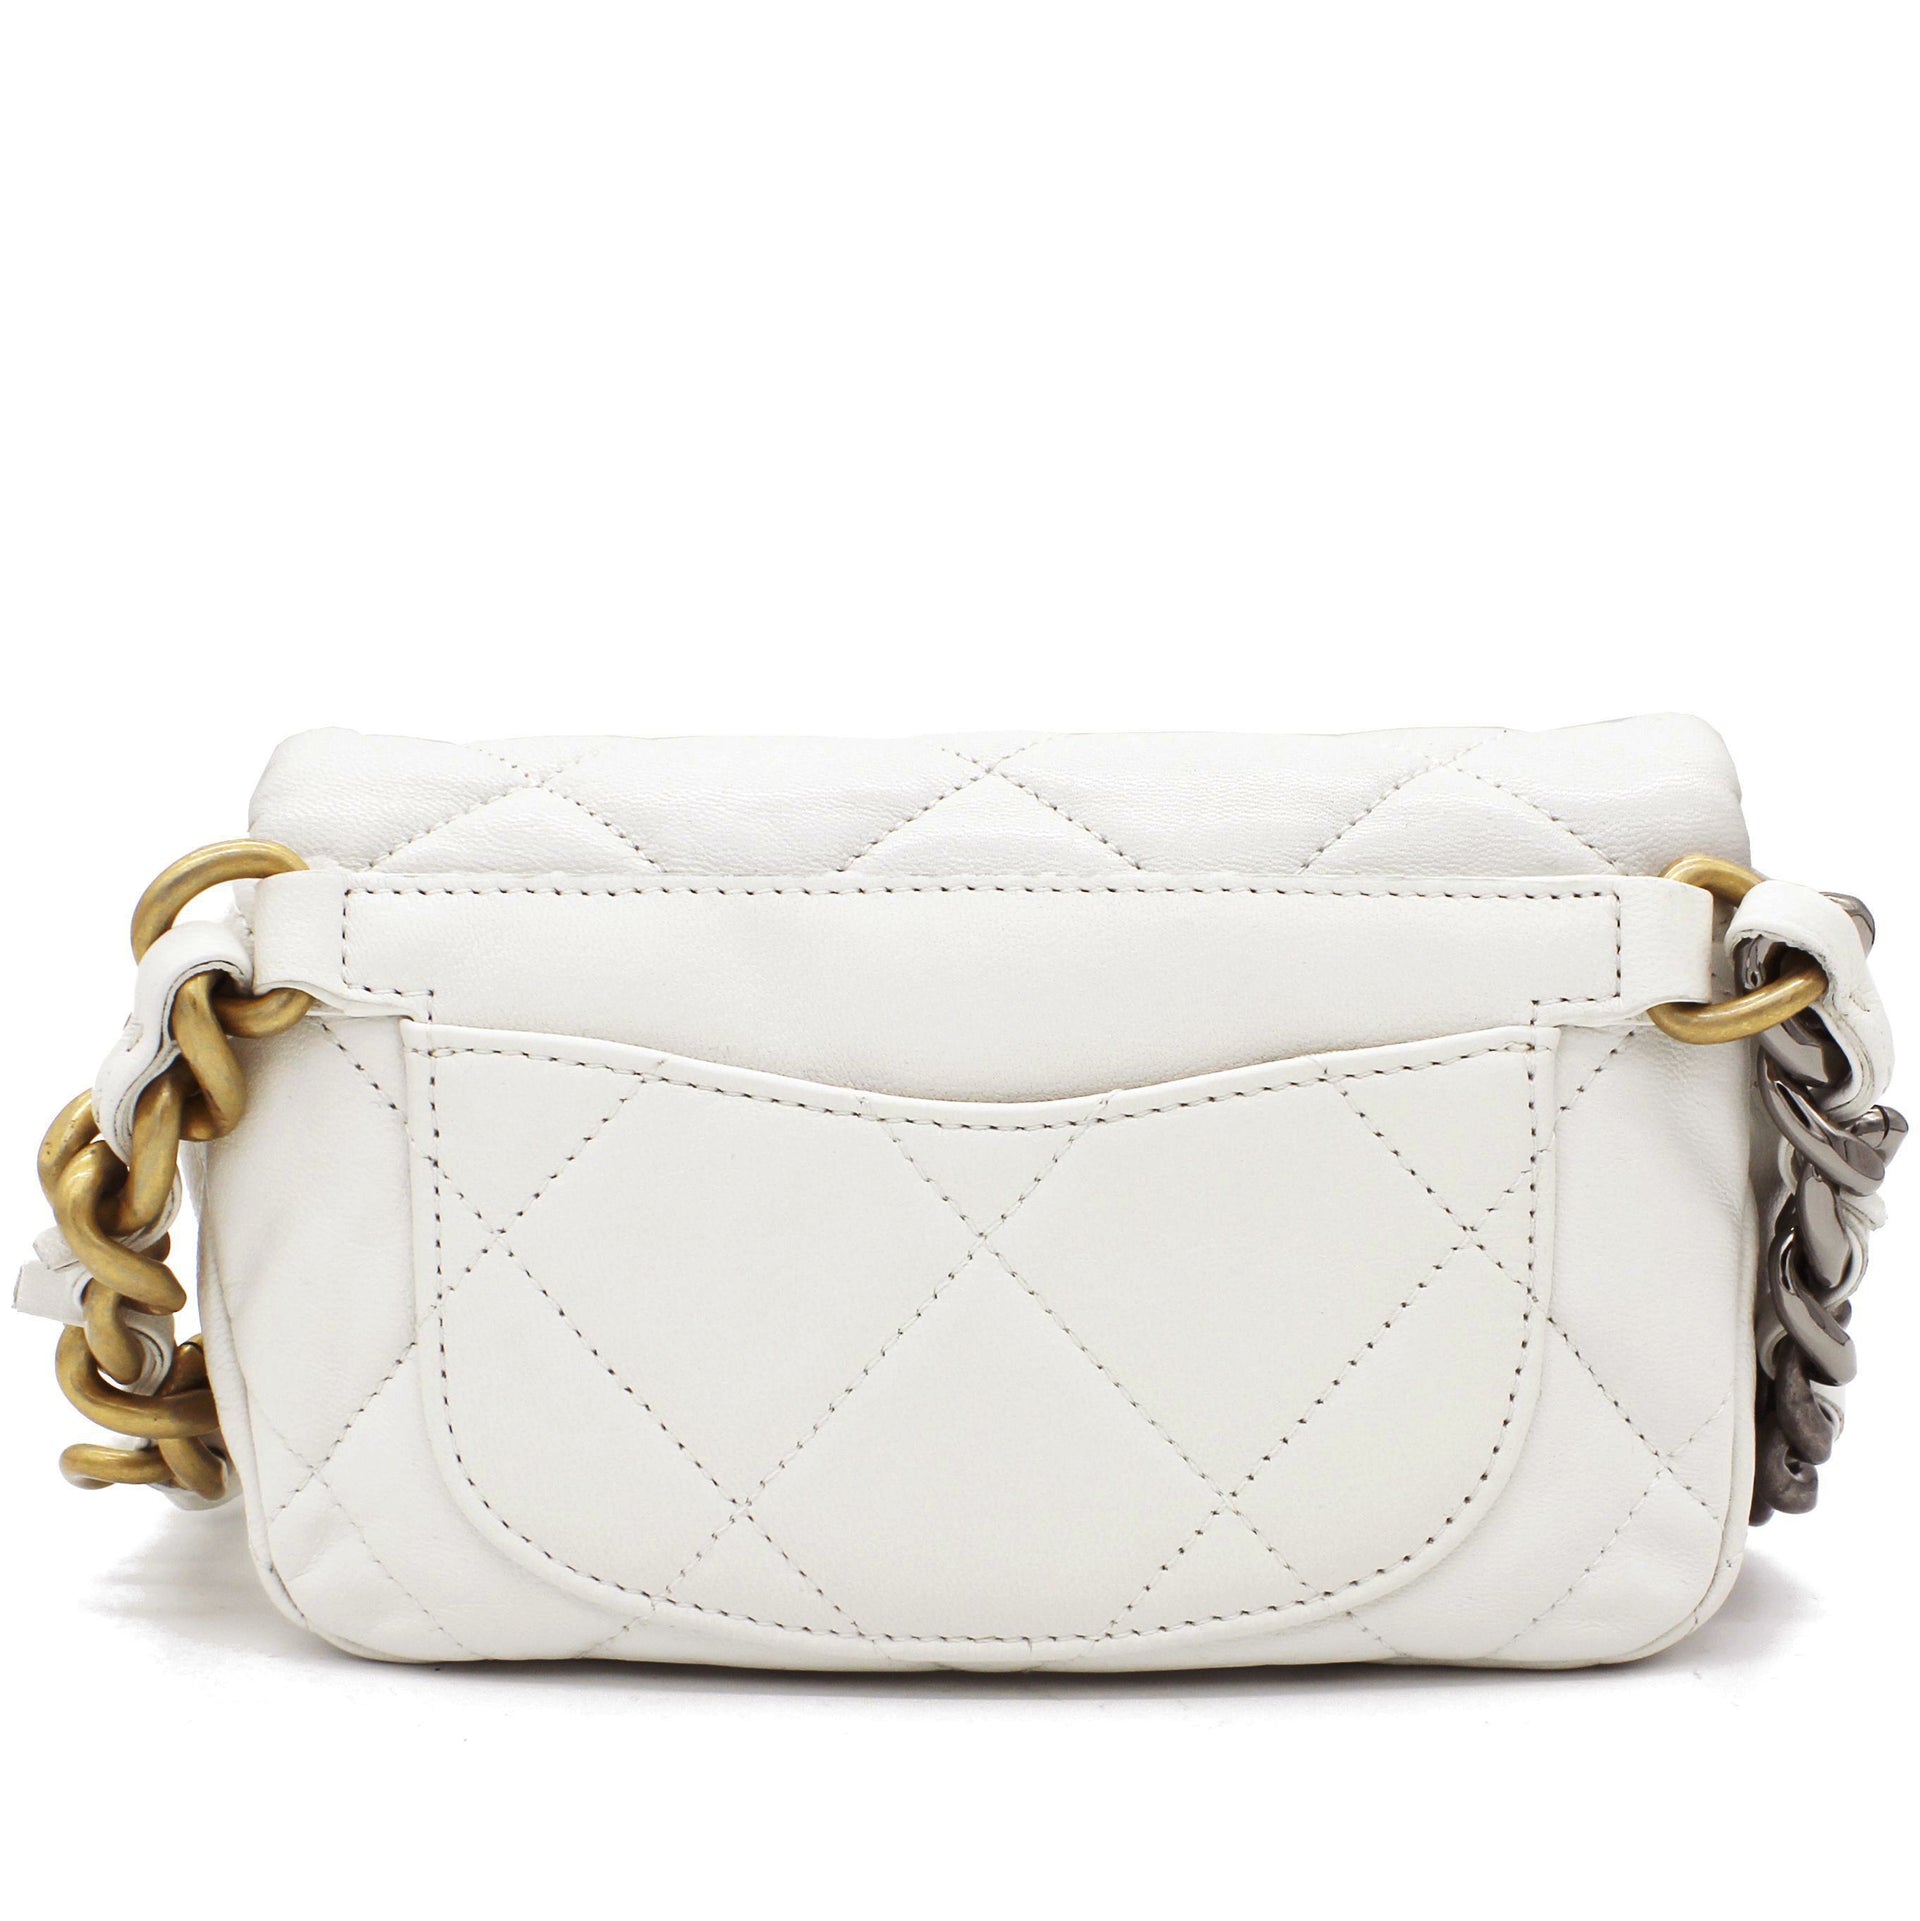 CHANEL Lambskin Quilted All About Chains Waist Belt Bag White 499090   FASHIONPHILE